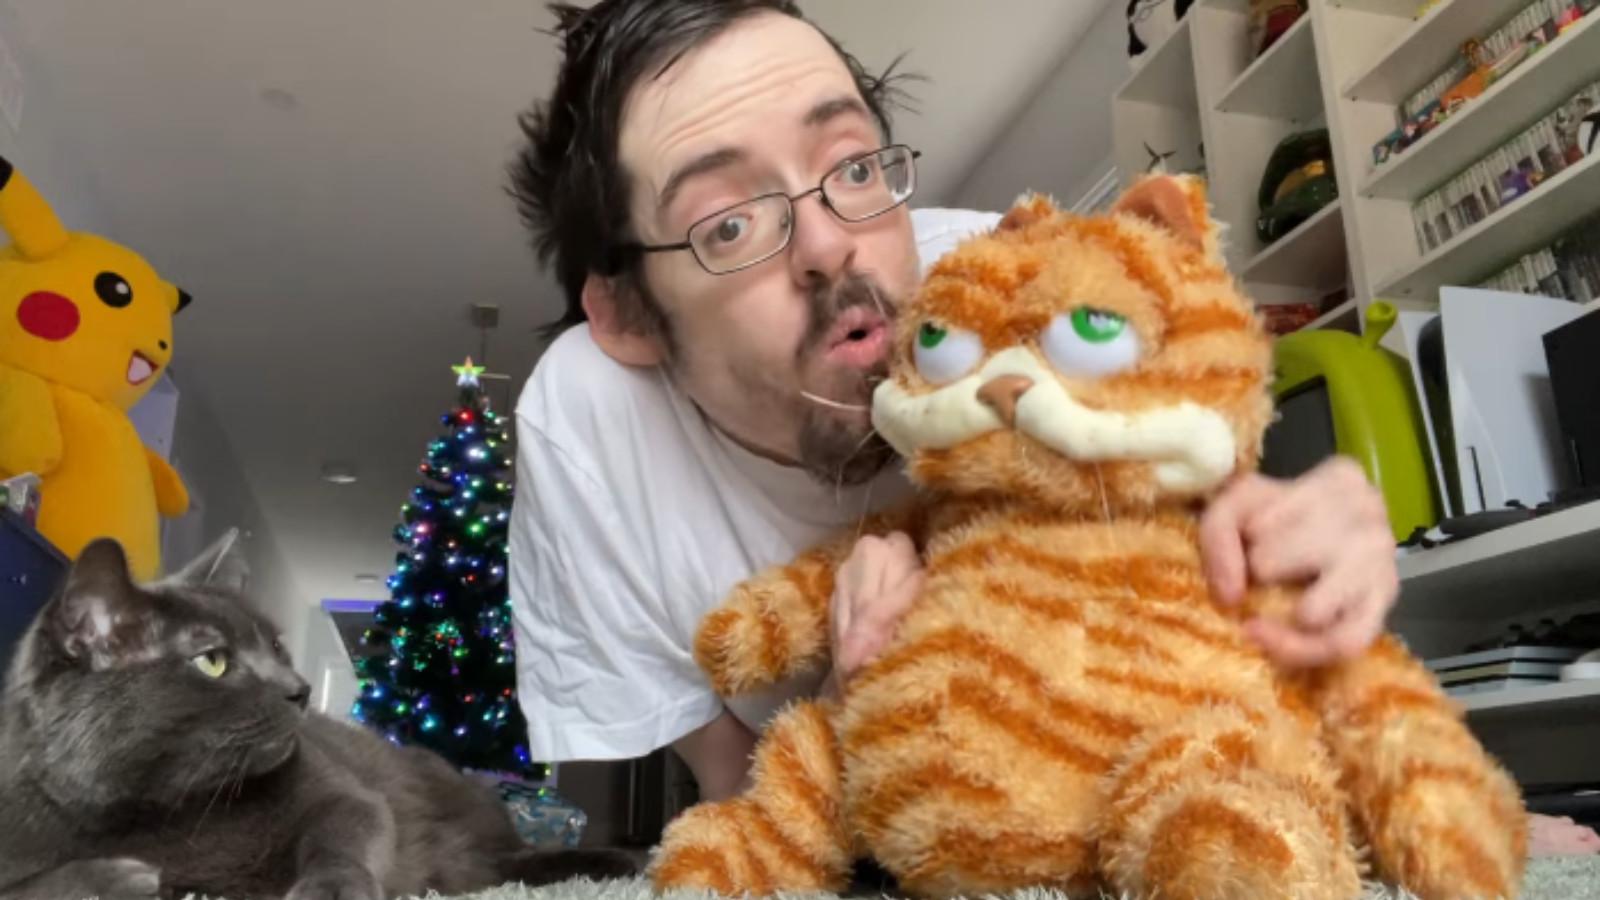 Ricky Berwick banned from twitch for humping garfield toy